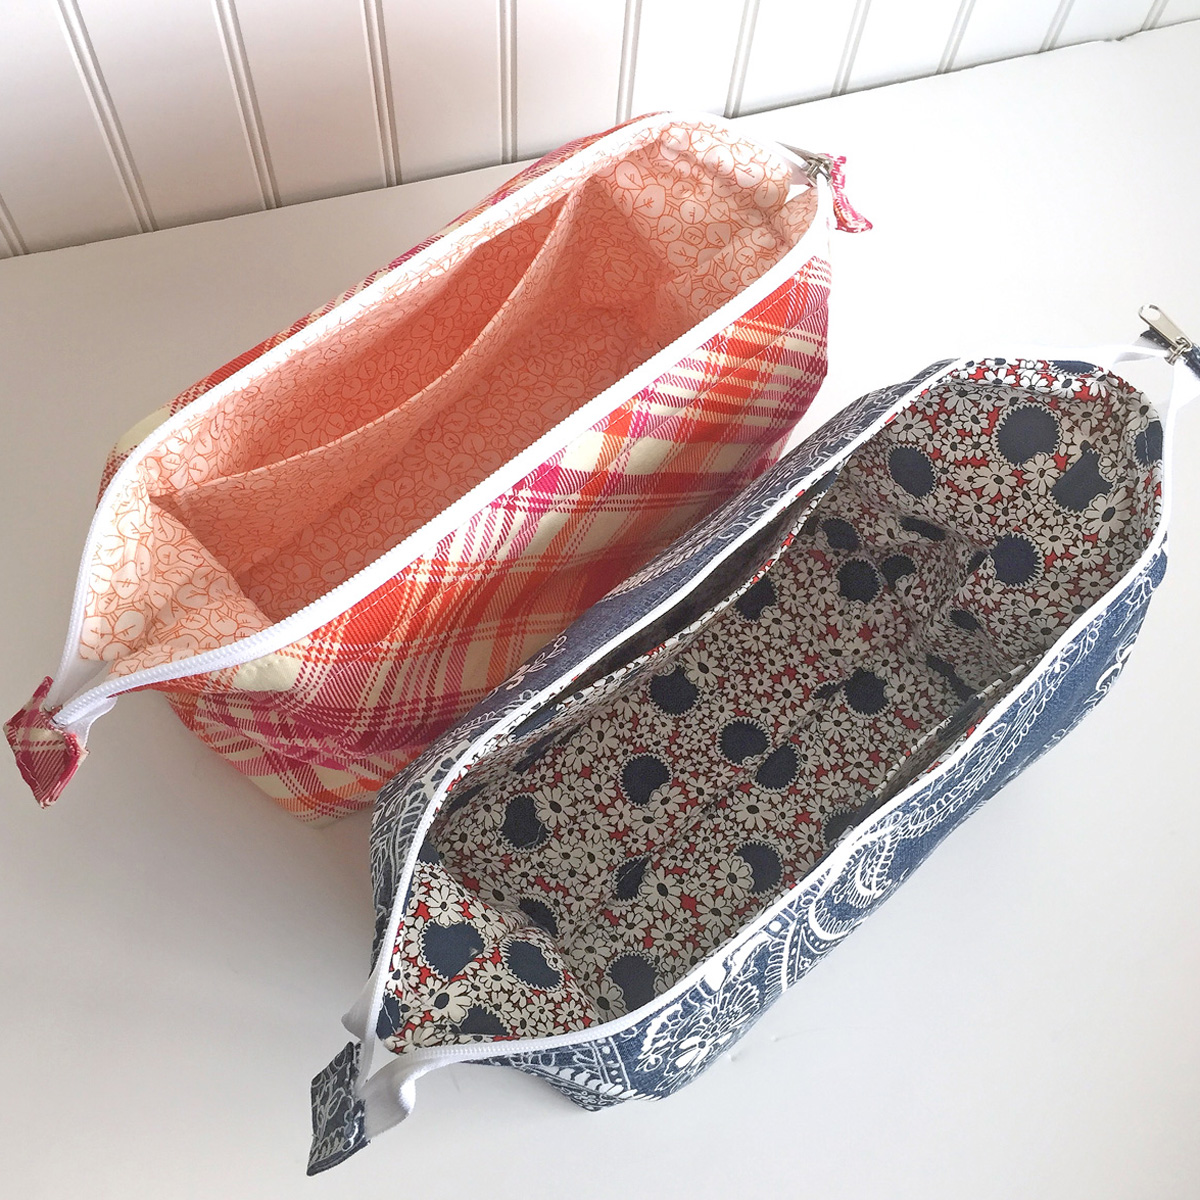 Emmaline Bags: Sewing Patterns and Purse Supplies: The Retreat Bag - A FREE Sewing Tutorial